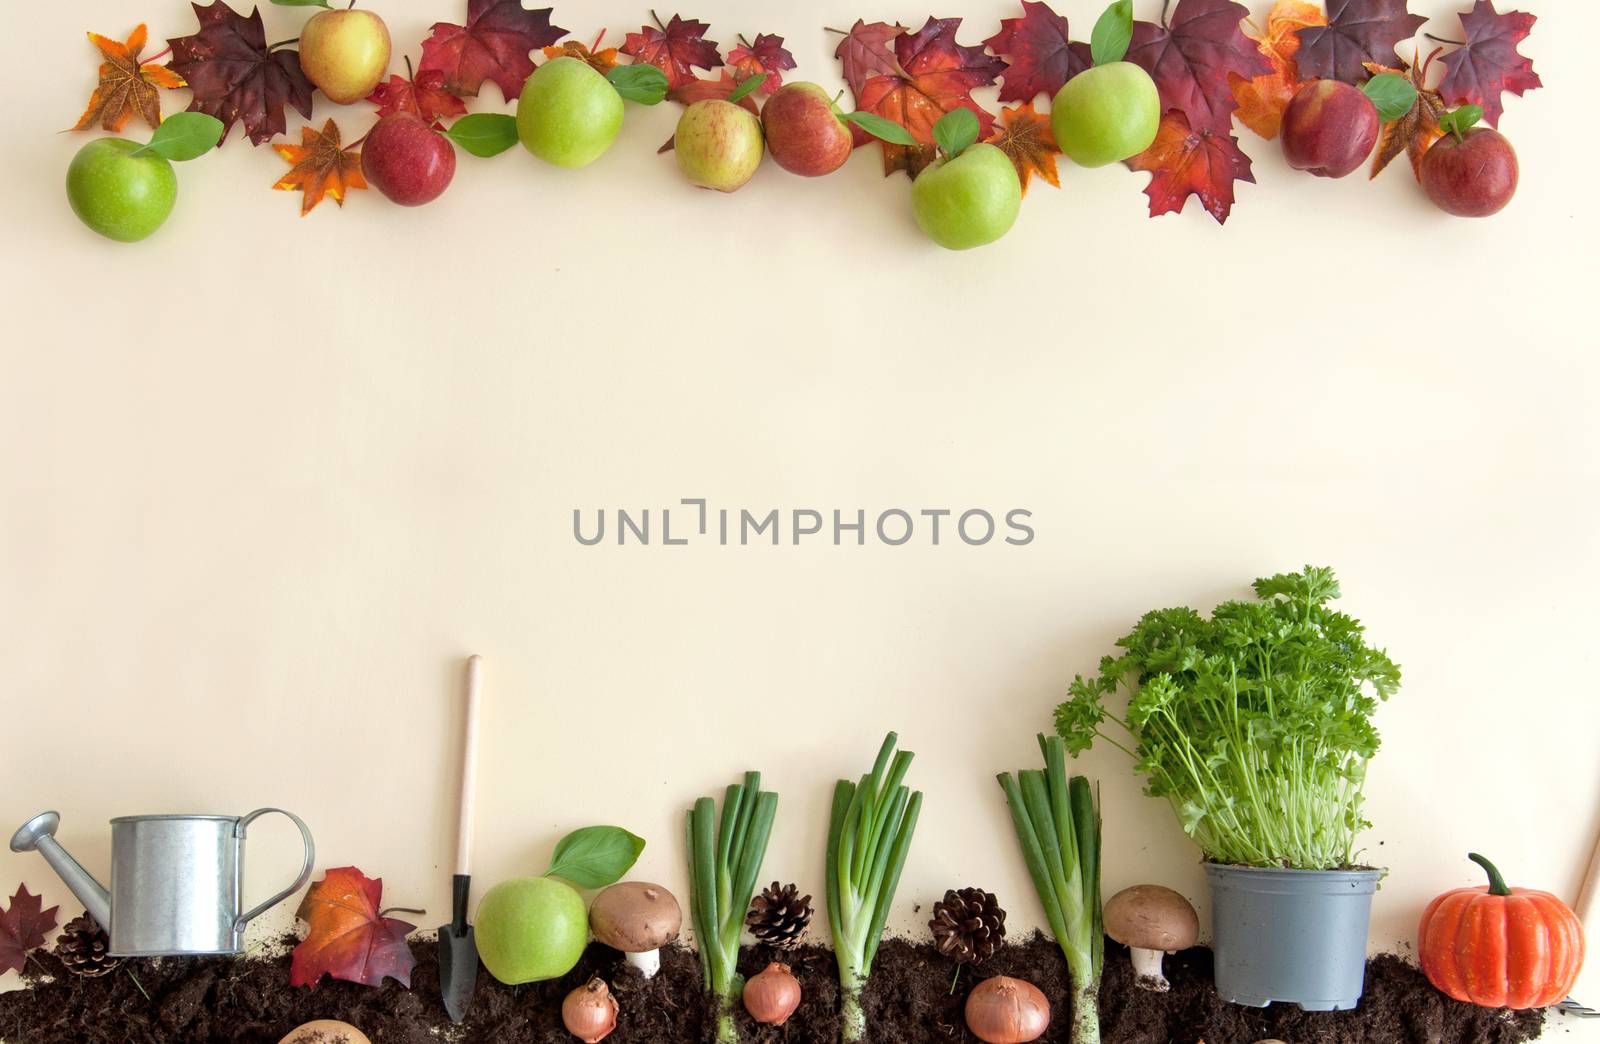 Autumn fruits growing from earth patch with apple orchard frame 